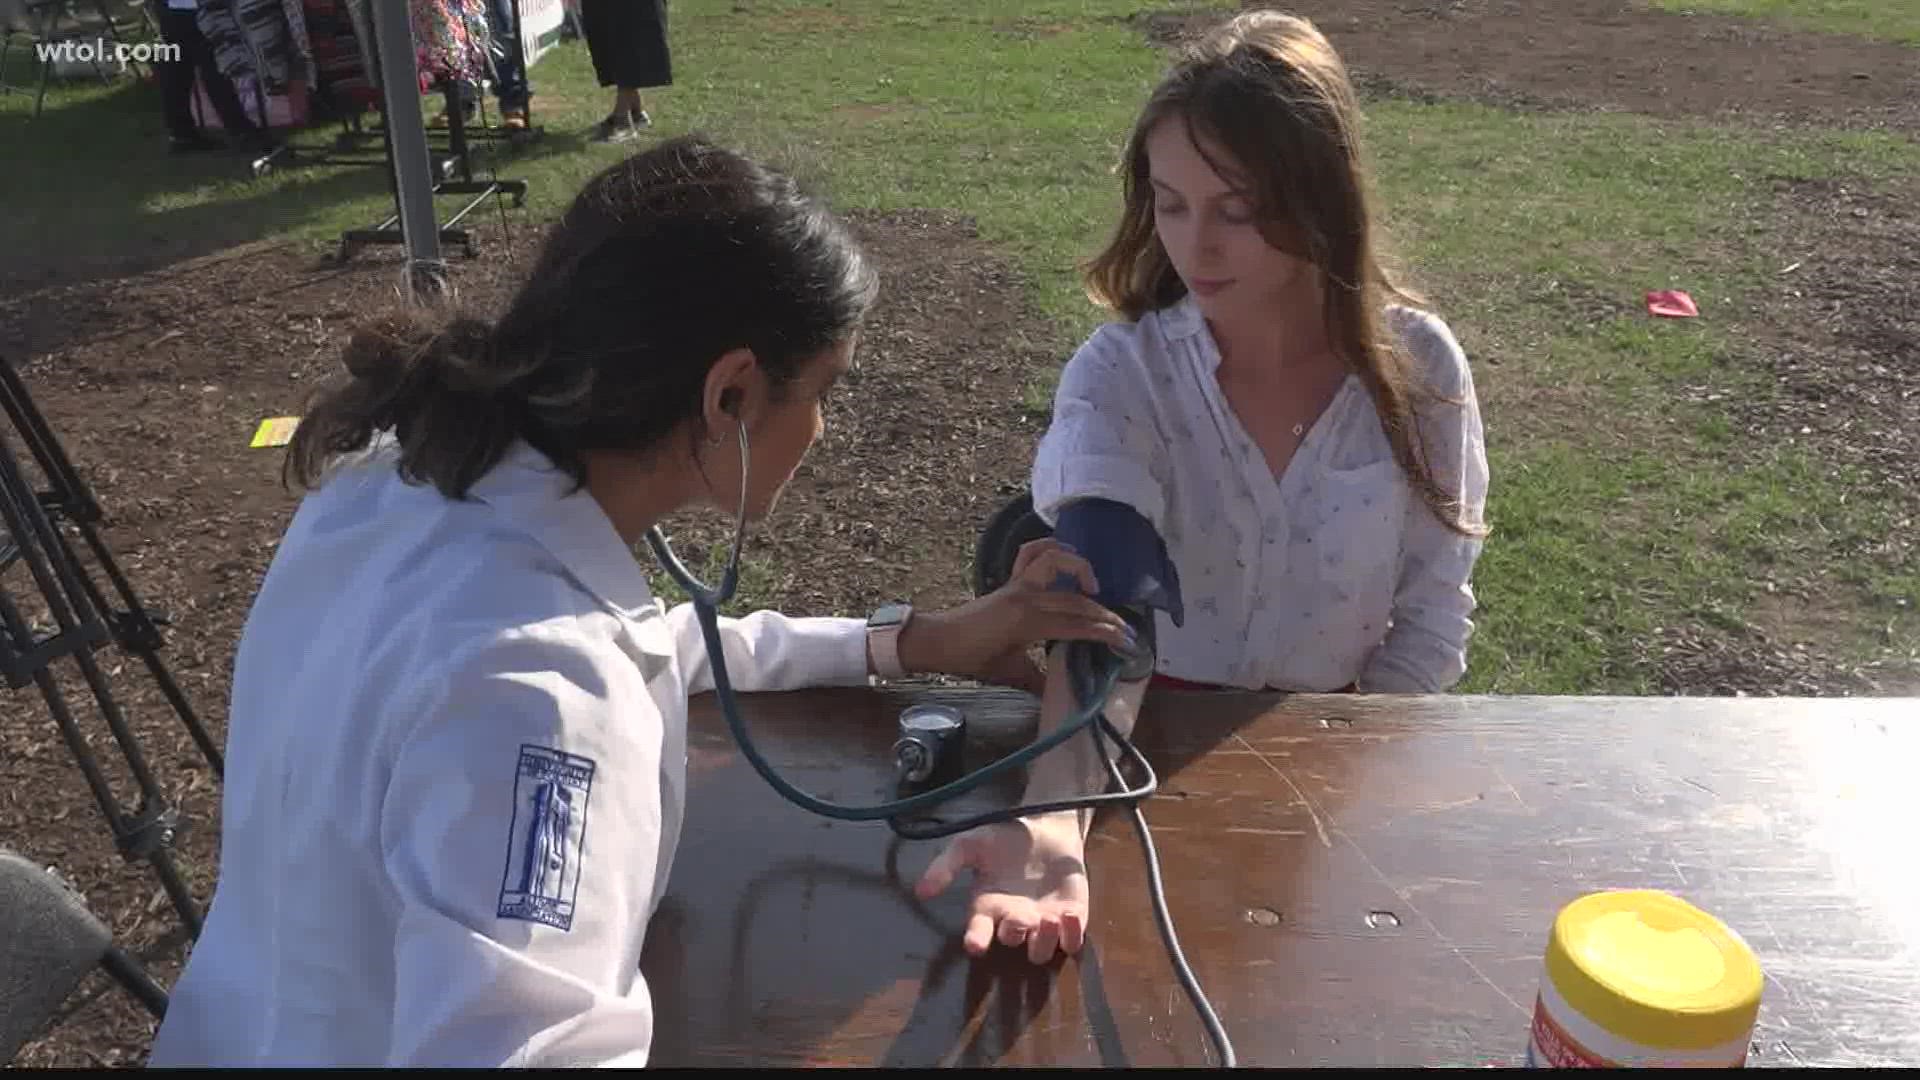 The University of Toledo's club of pre-medical students, Spanish Médica,  had a tent at the event where they worked to inform the community about hypertension.